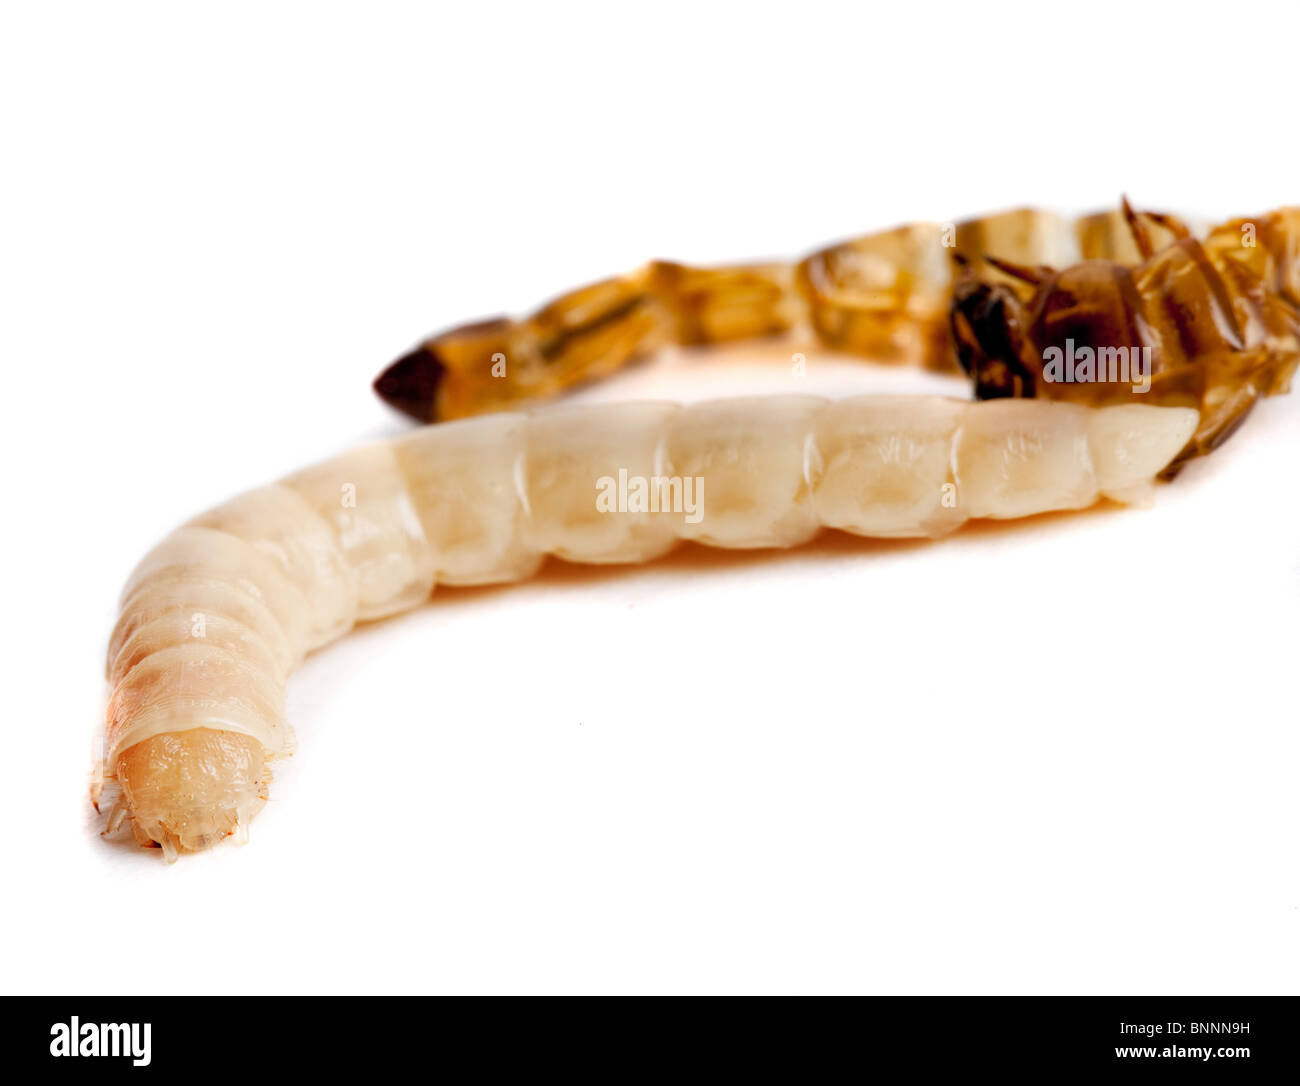 Isolated mealworm or worm reborn after shedding its skin Stock Photo